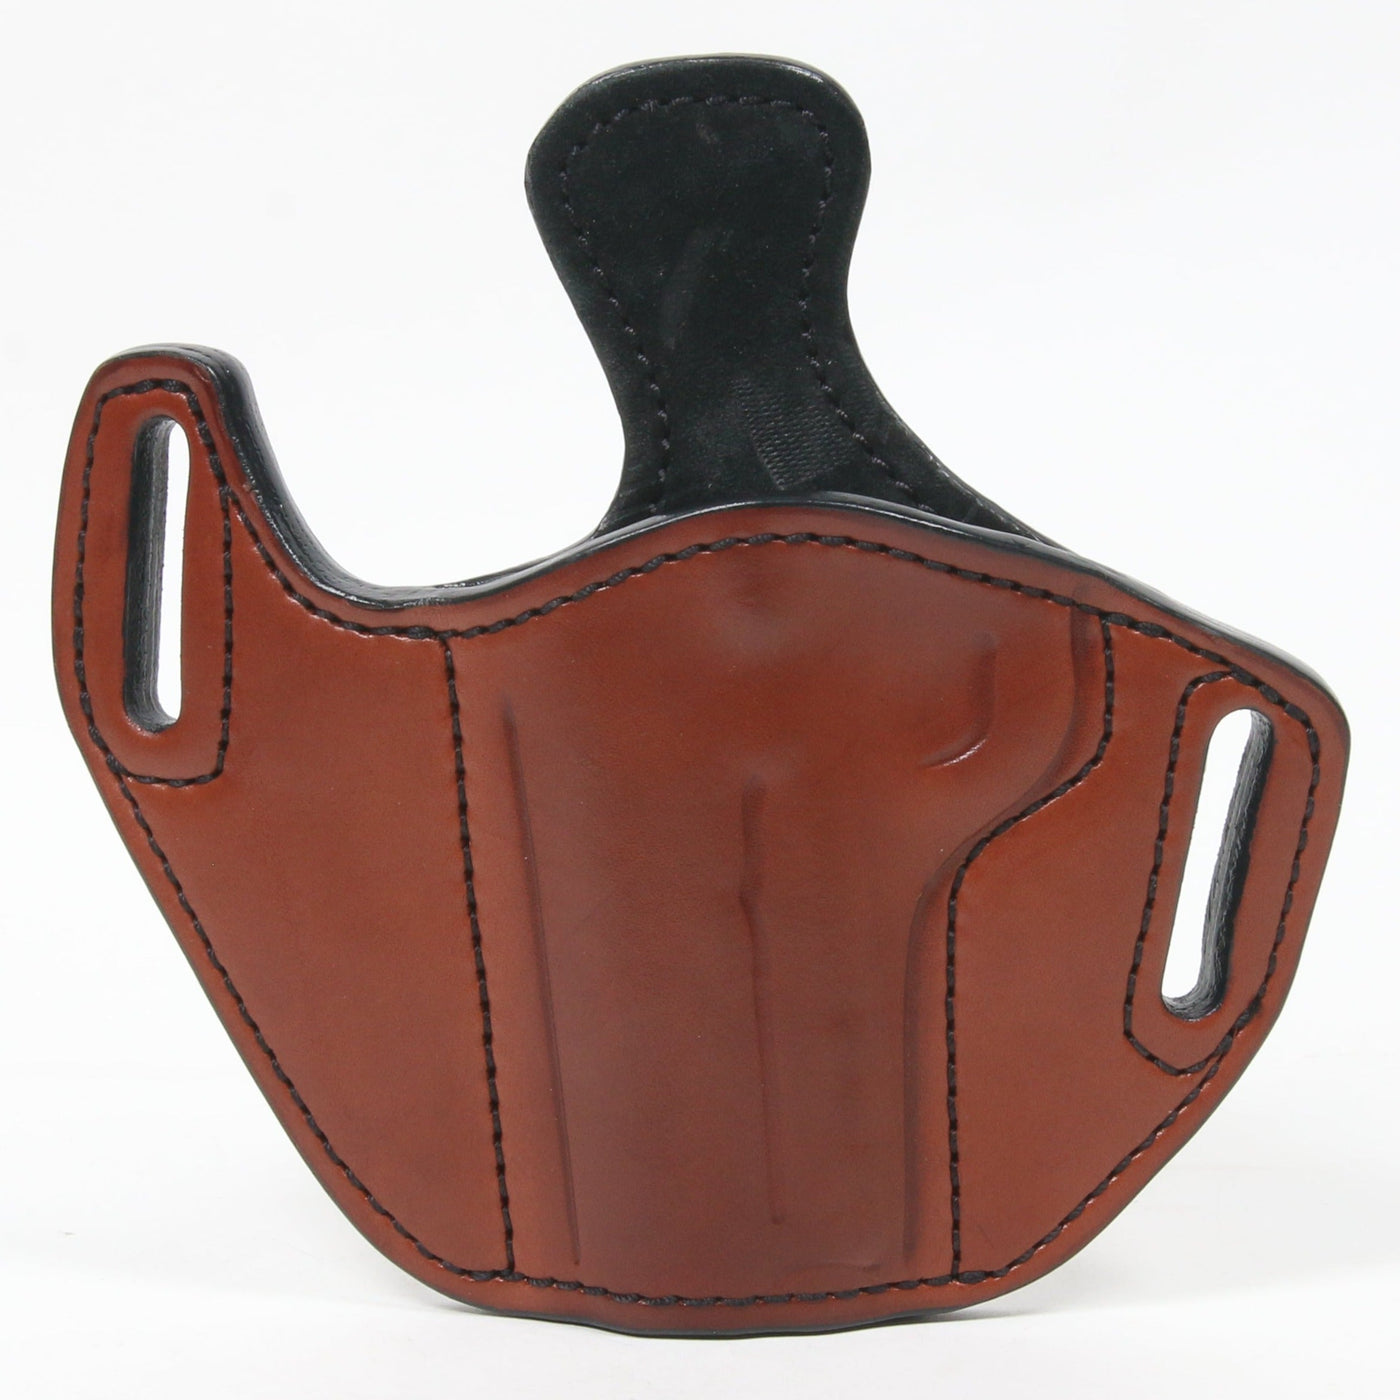 Cowhide OWB Holster for 1911 with 4.25" BL with Red Dot Optic